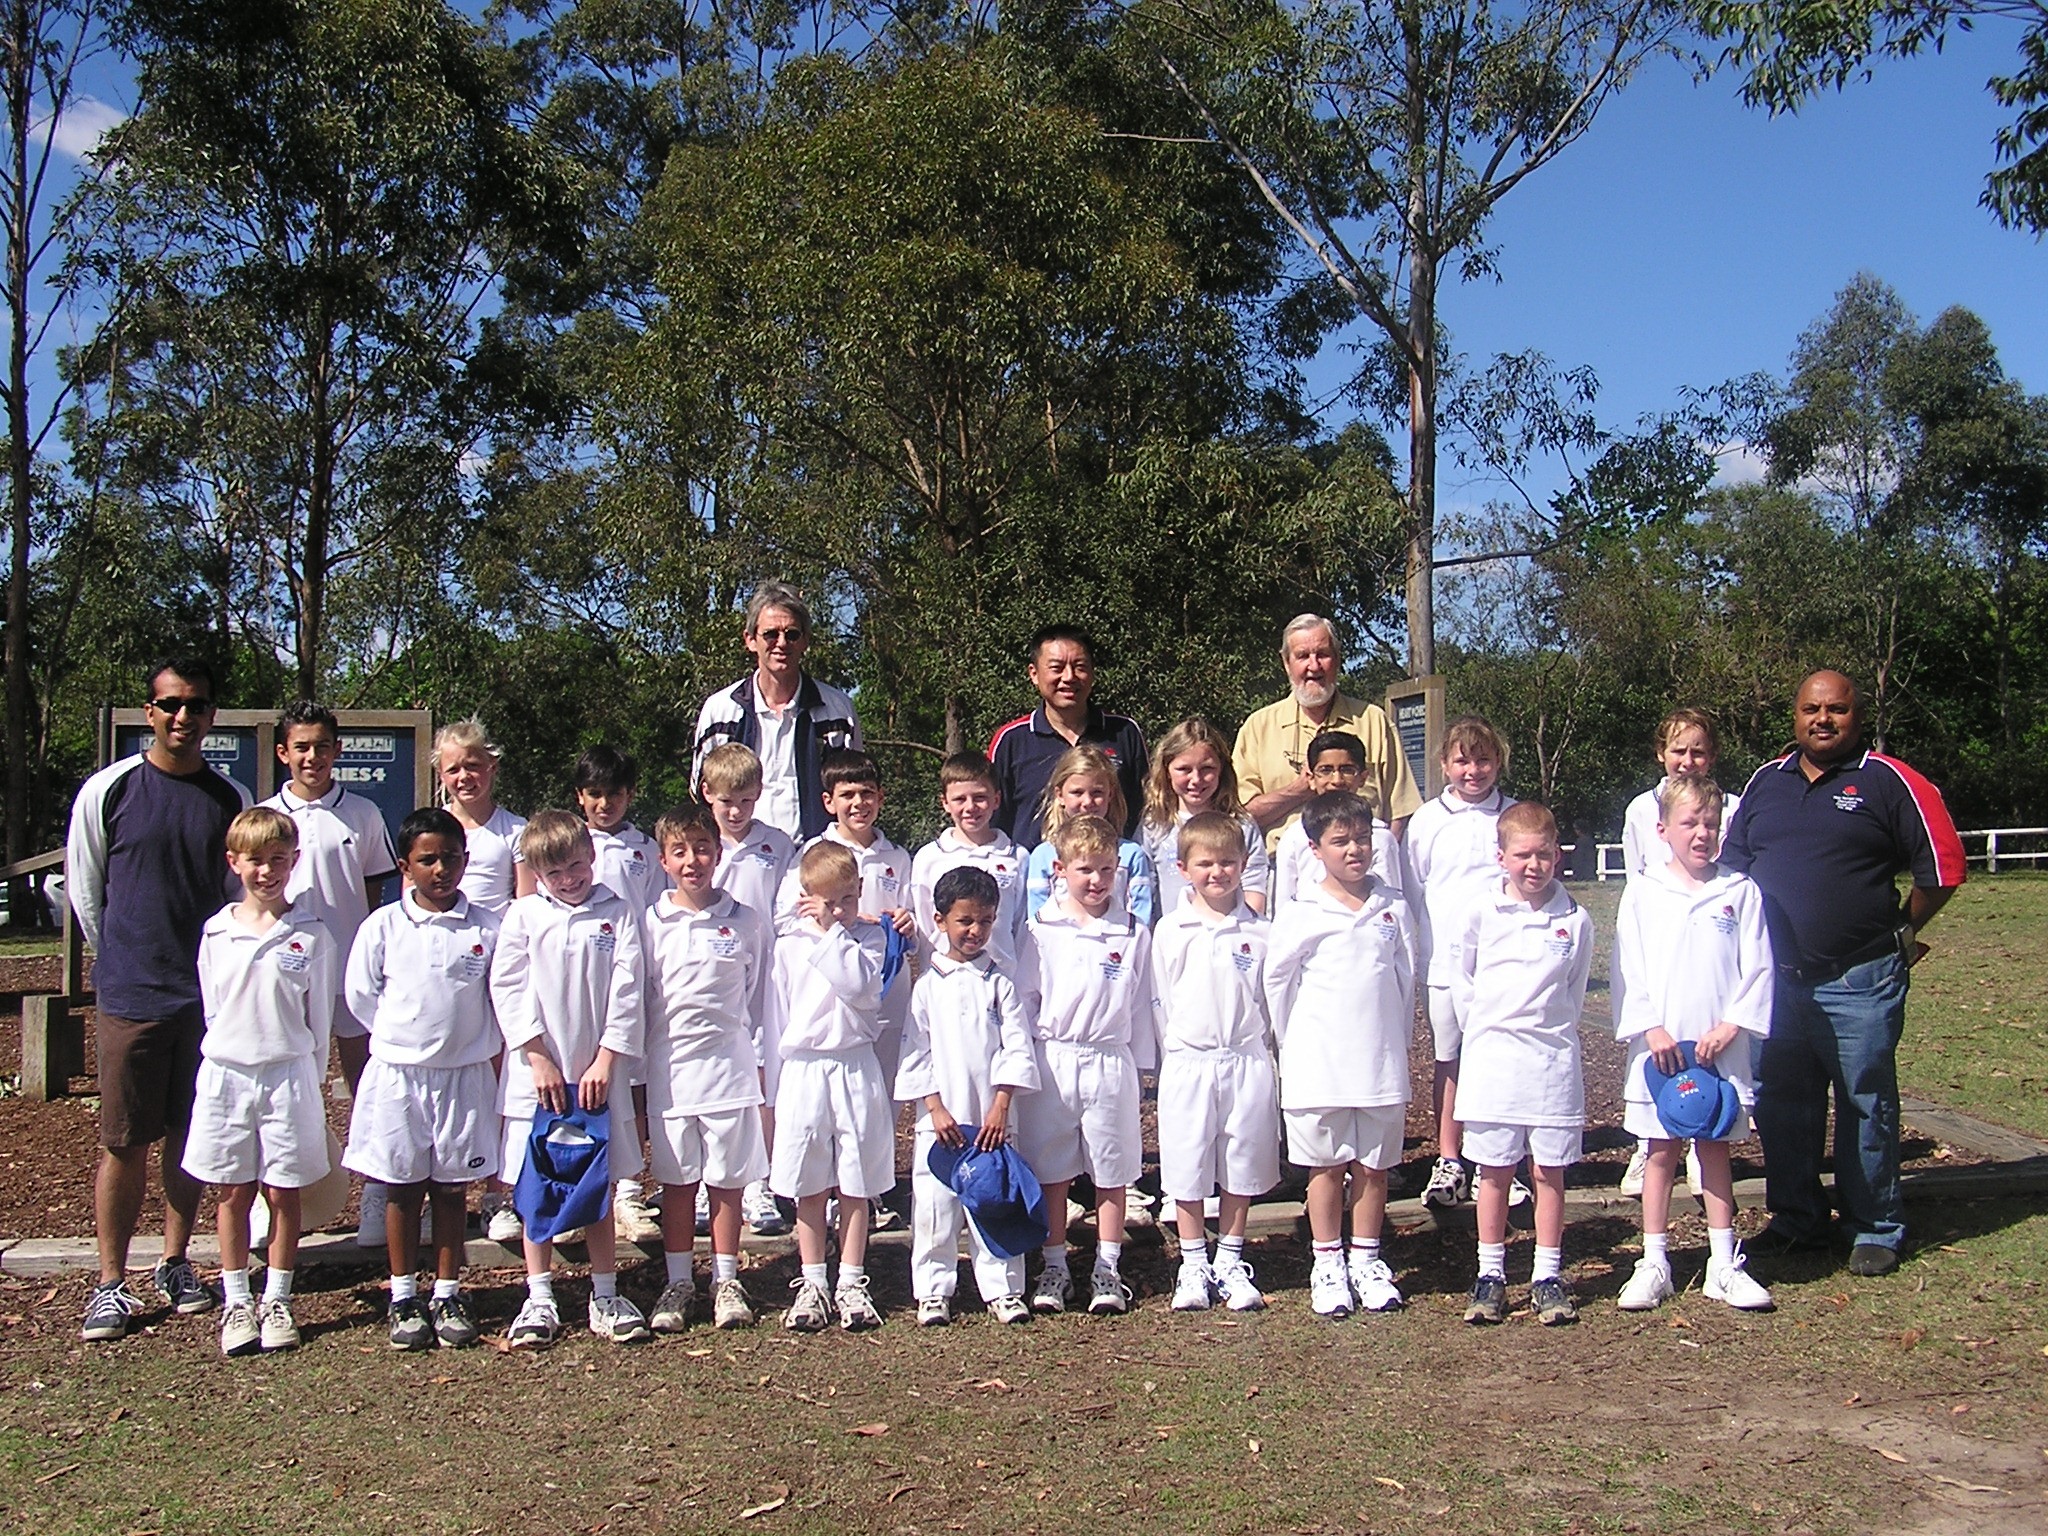 Our 18 Kanga children and mentors arriving for the all day shoot (8.00 am to 4.00 pm) for a Milo TV ad with Netball star Lis Ellis. Our parents are - Raj Babla, Myles O'Meara, Patrick Chensee, John Coulthard, Deepak Narsai - Turramurra Oval on 19 October 2004.